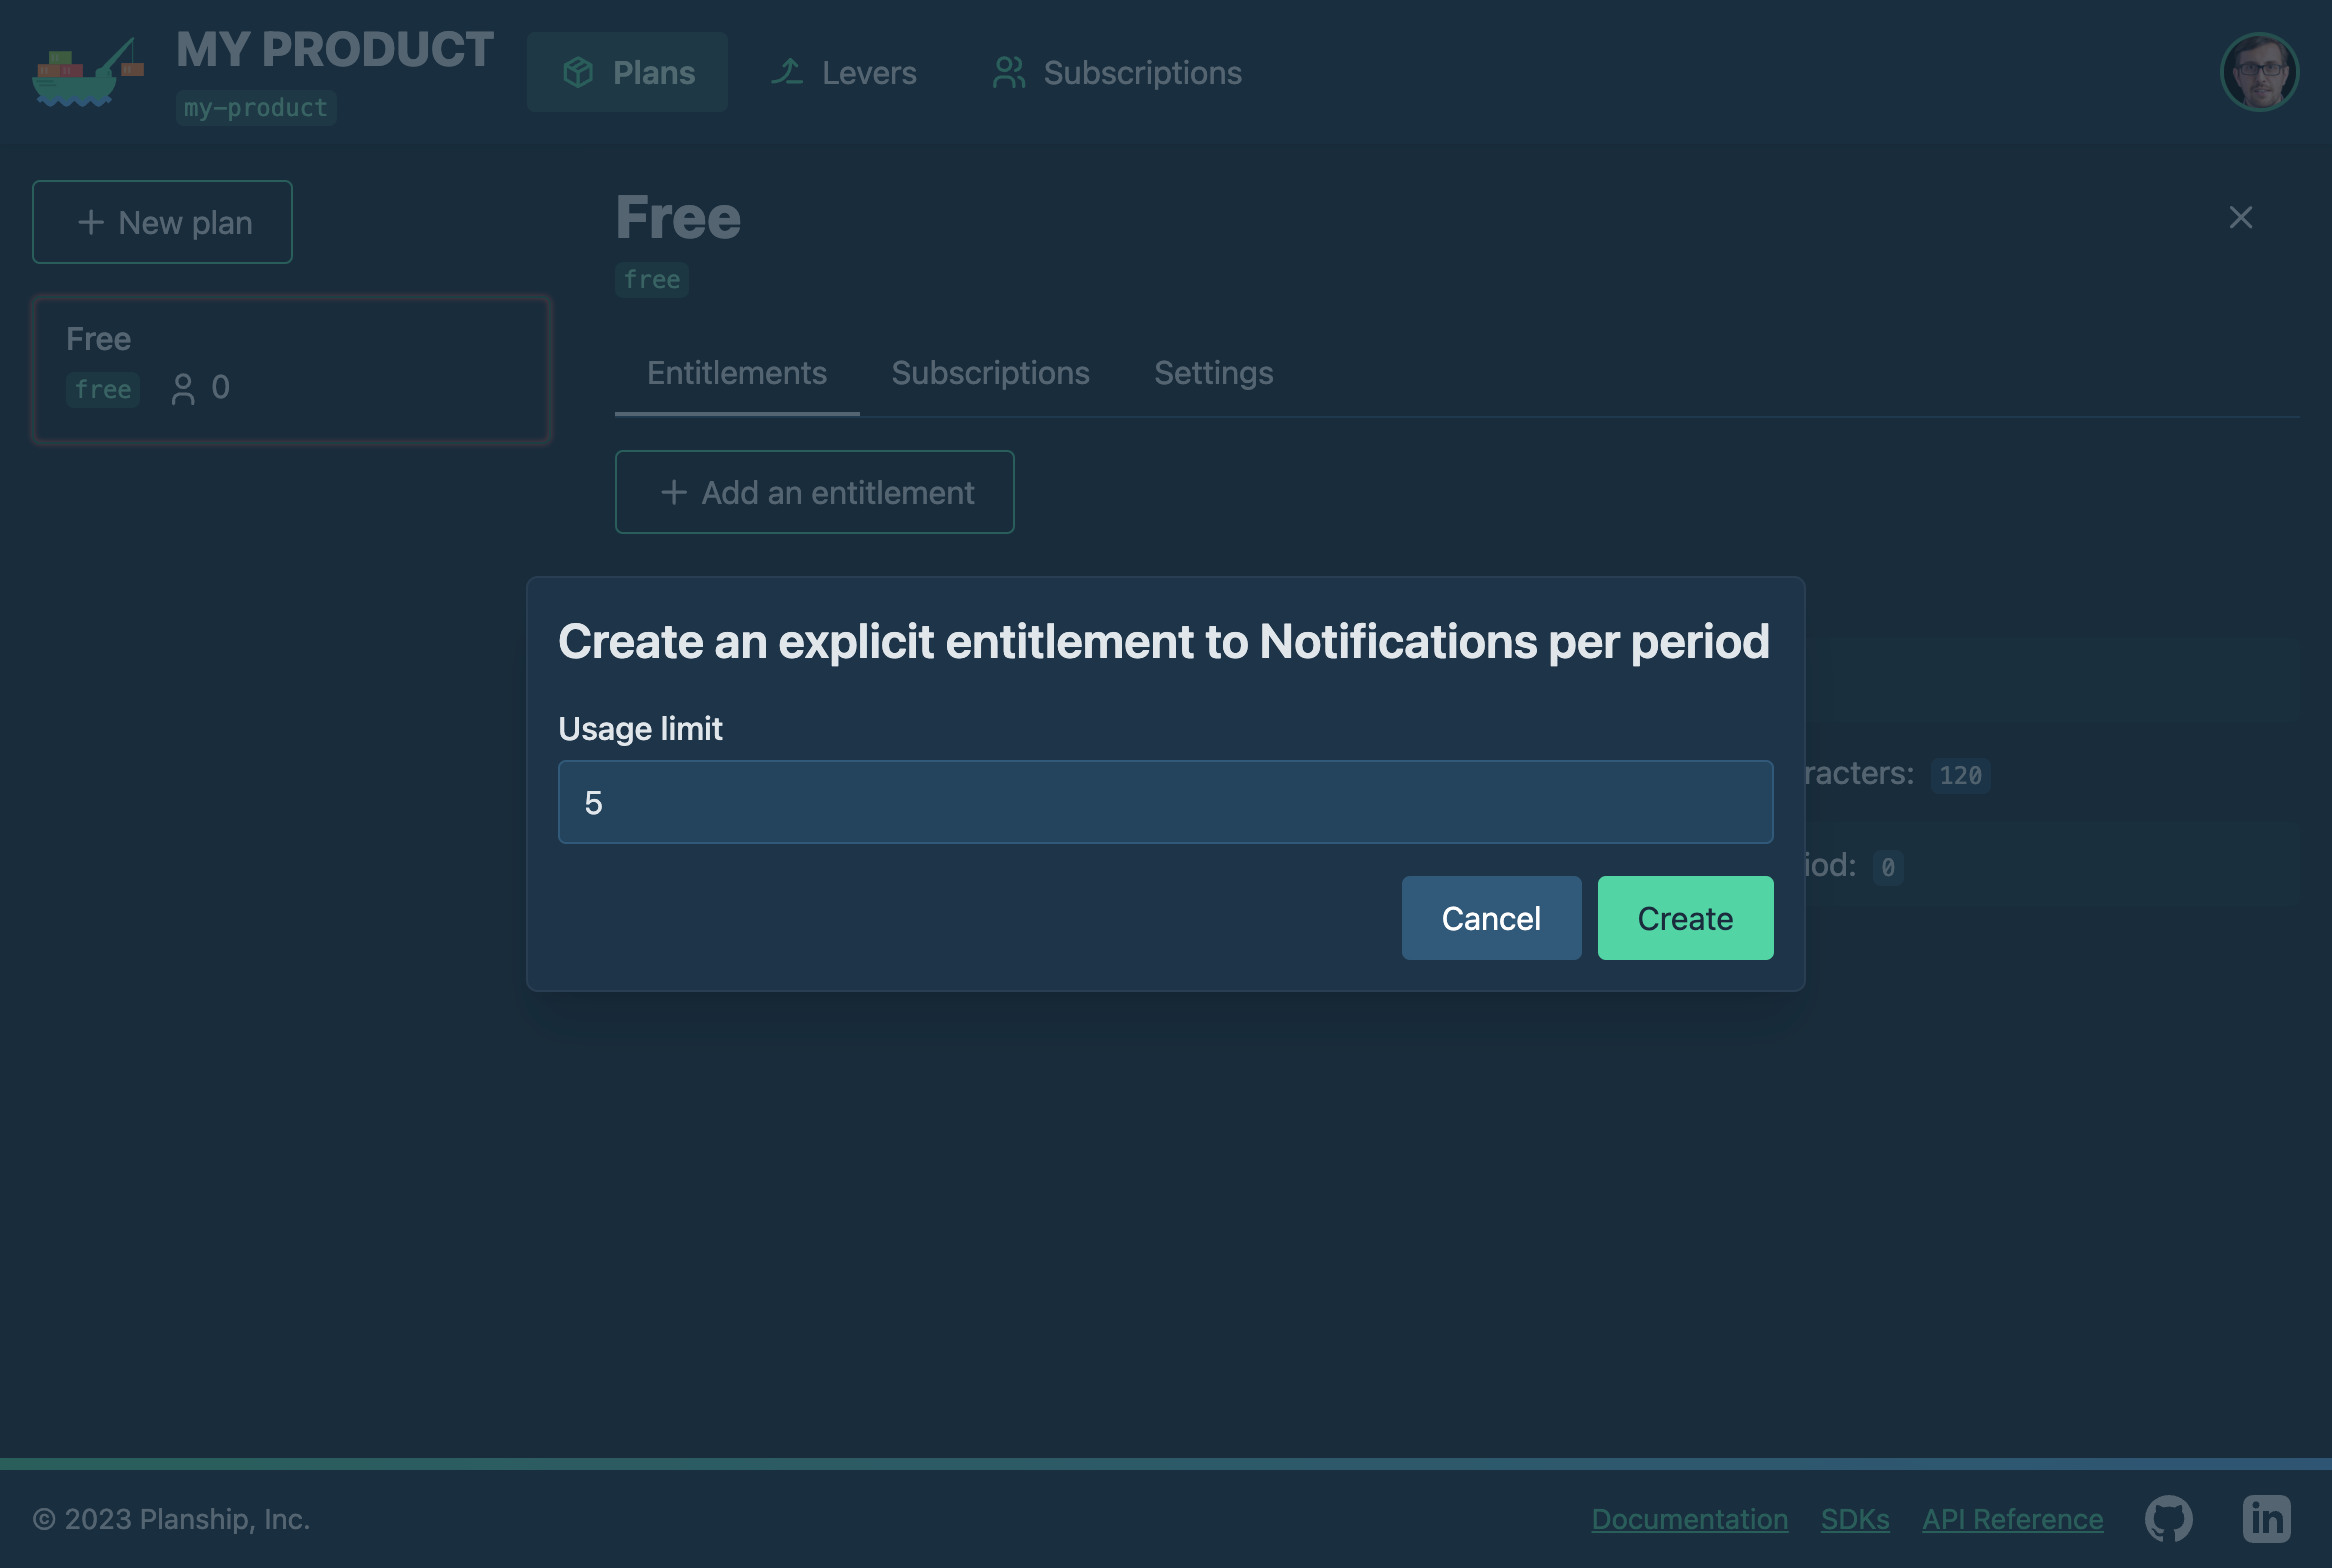 Planship console screenshot showing creation of an explicit entitlement for the **Notifications per period** lever